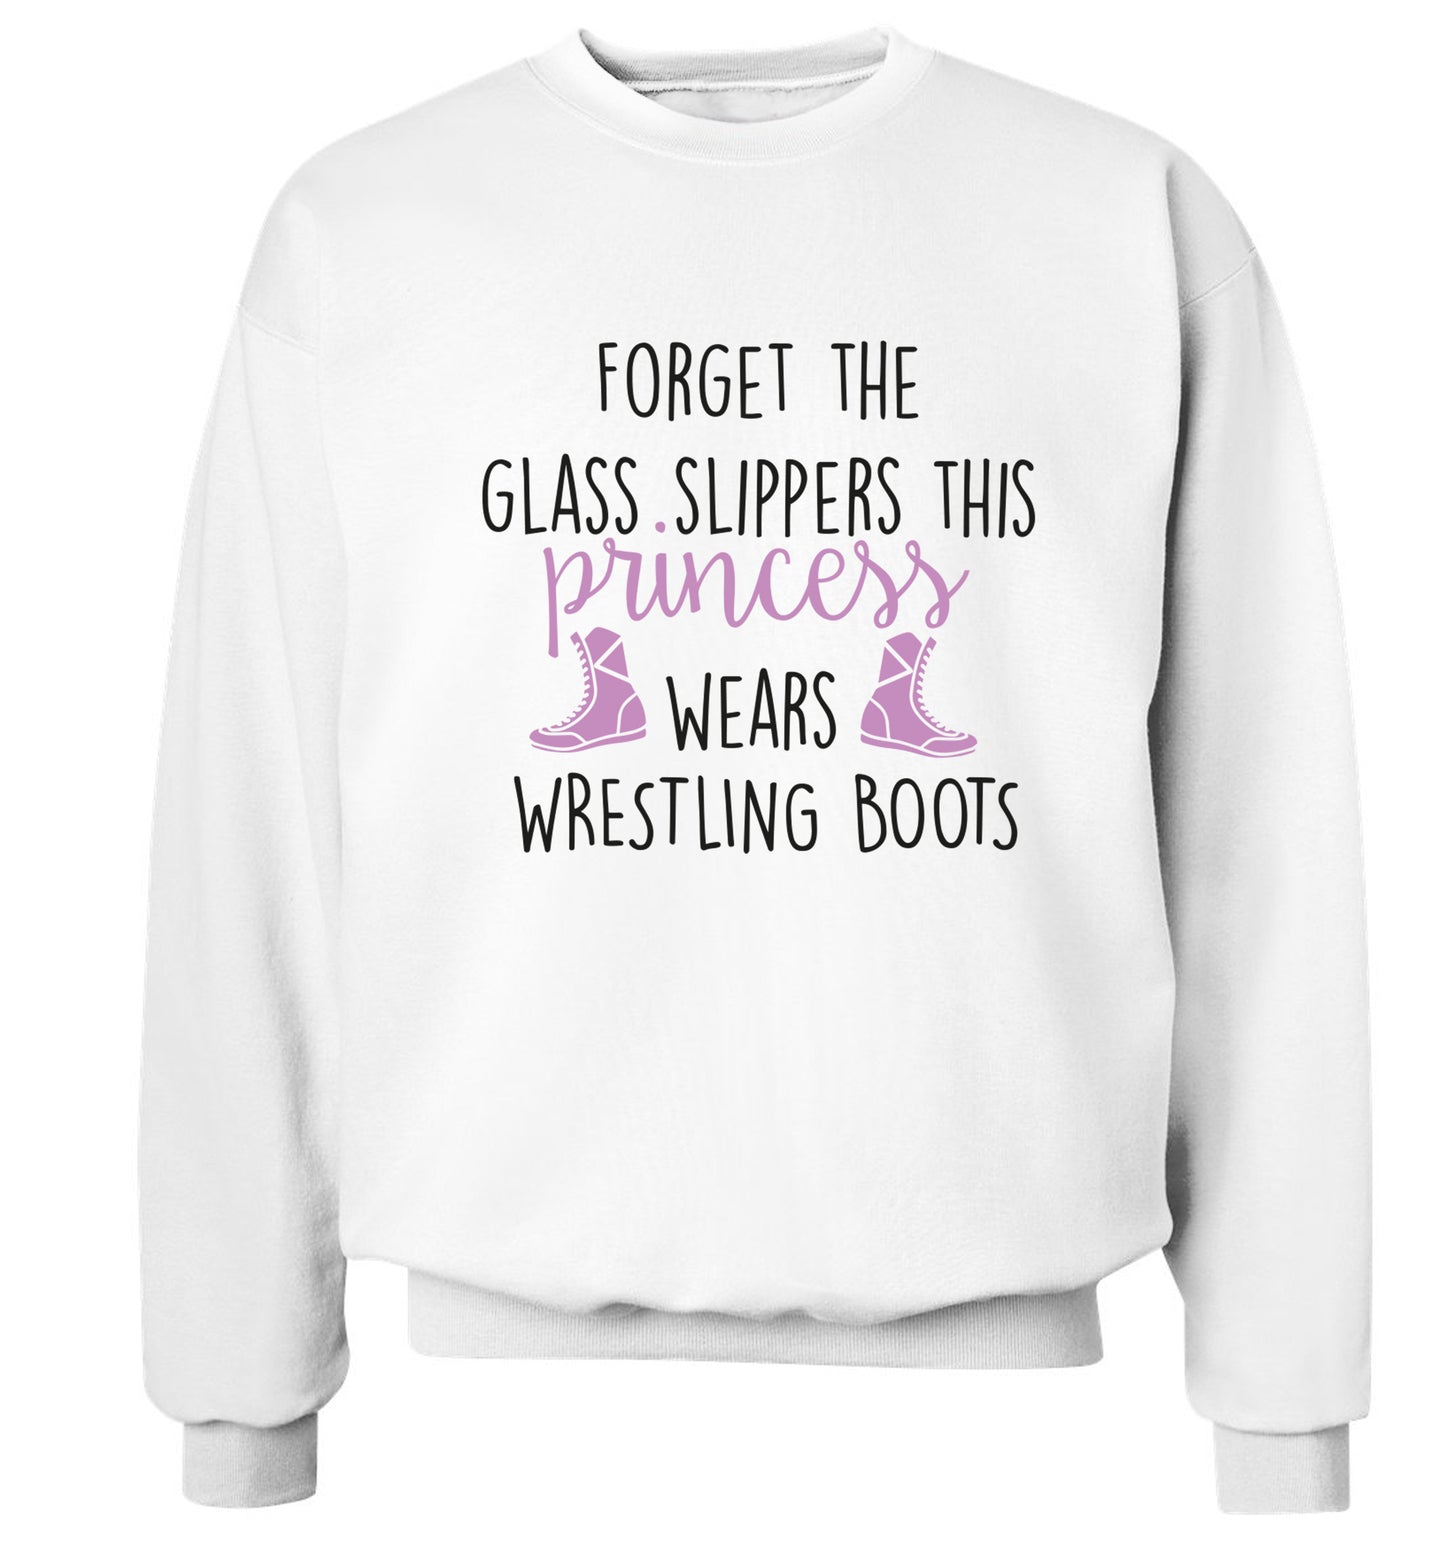 Forget the glass slippers this princess wears wrestling boots Adult's unisex white Sweater 2XL